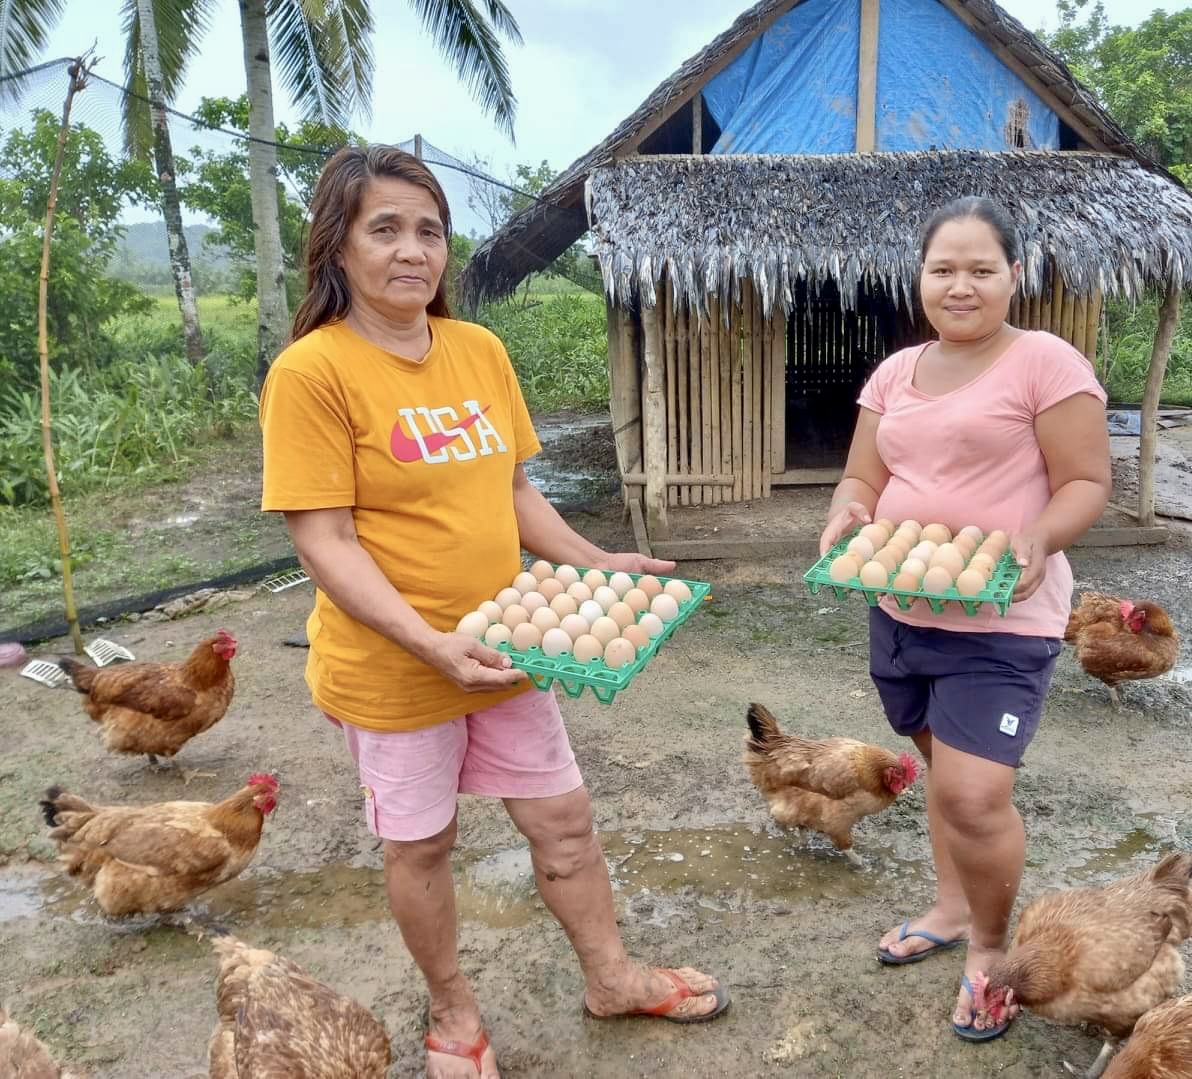 Hatching results, DA-SAAD continues to support poultry ventures of Bicolano farmers